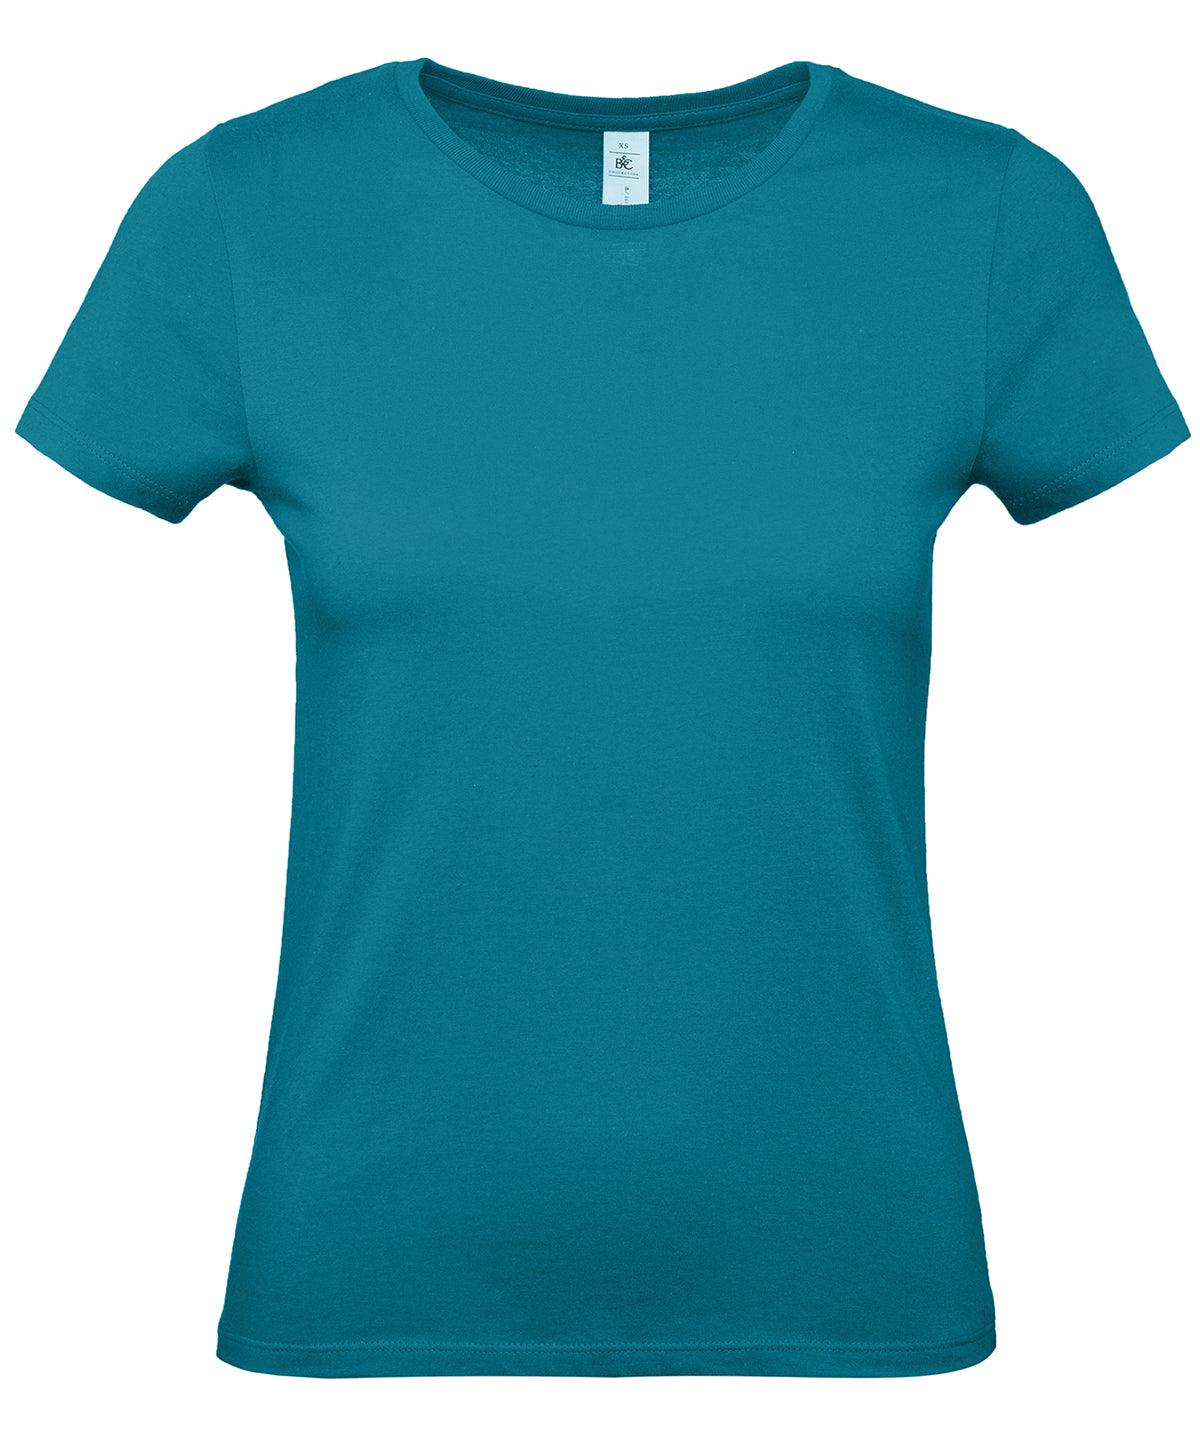 Diva Blue - B&C #E150 /women T-Shirts B&C Collection Holiday Season, Hyperbrights and Neons, Must Haves, Plus Sizes, T-Shirts & Vests Schoolwear Centres